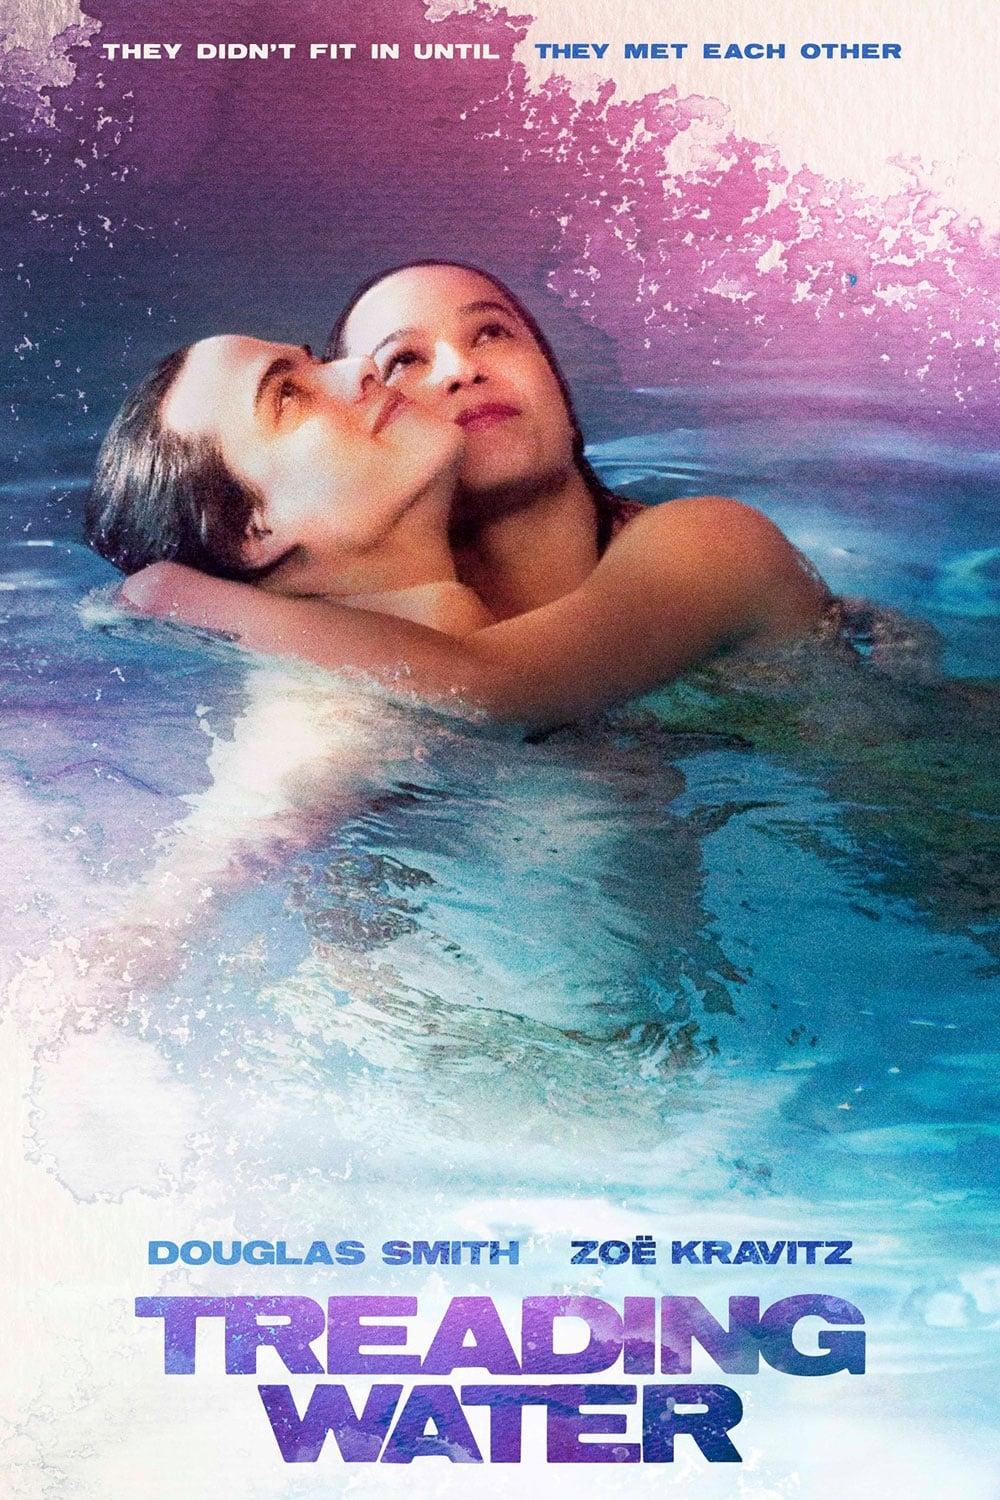 Treading Water poster